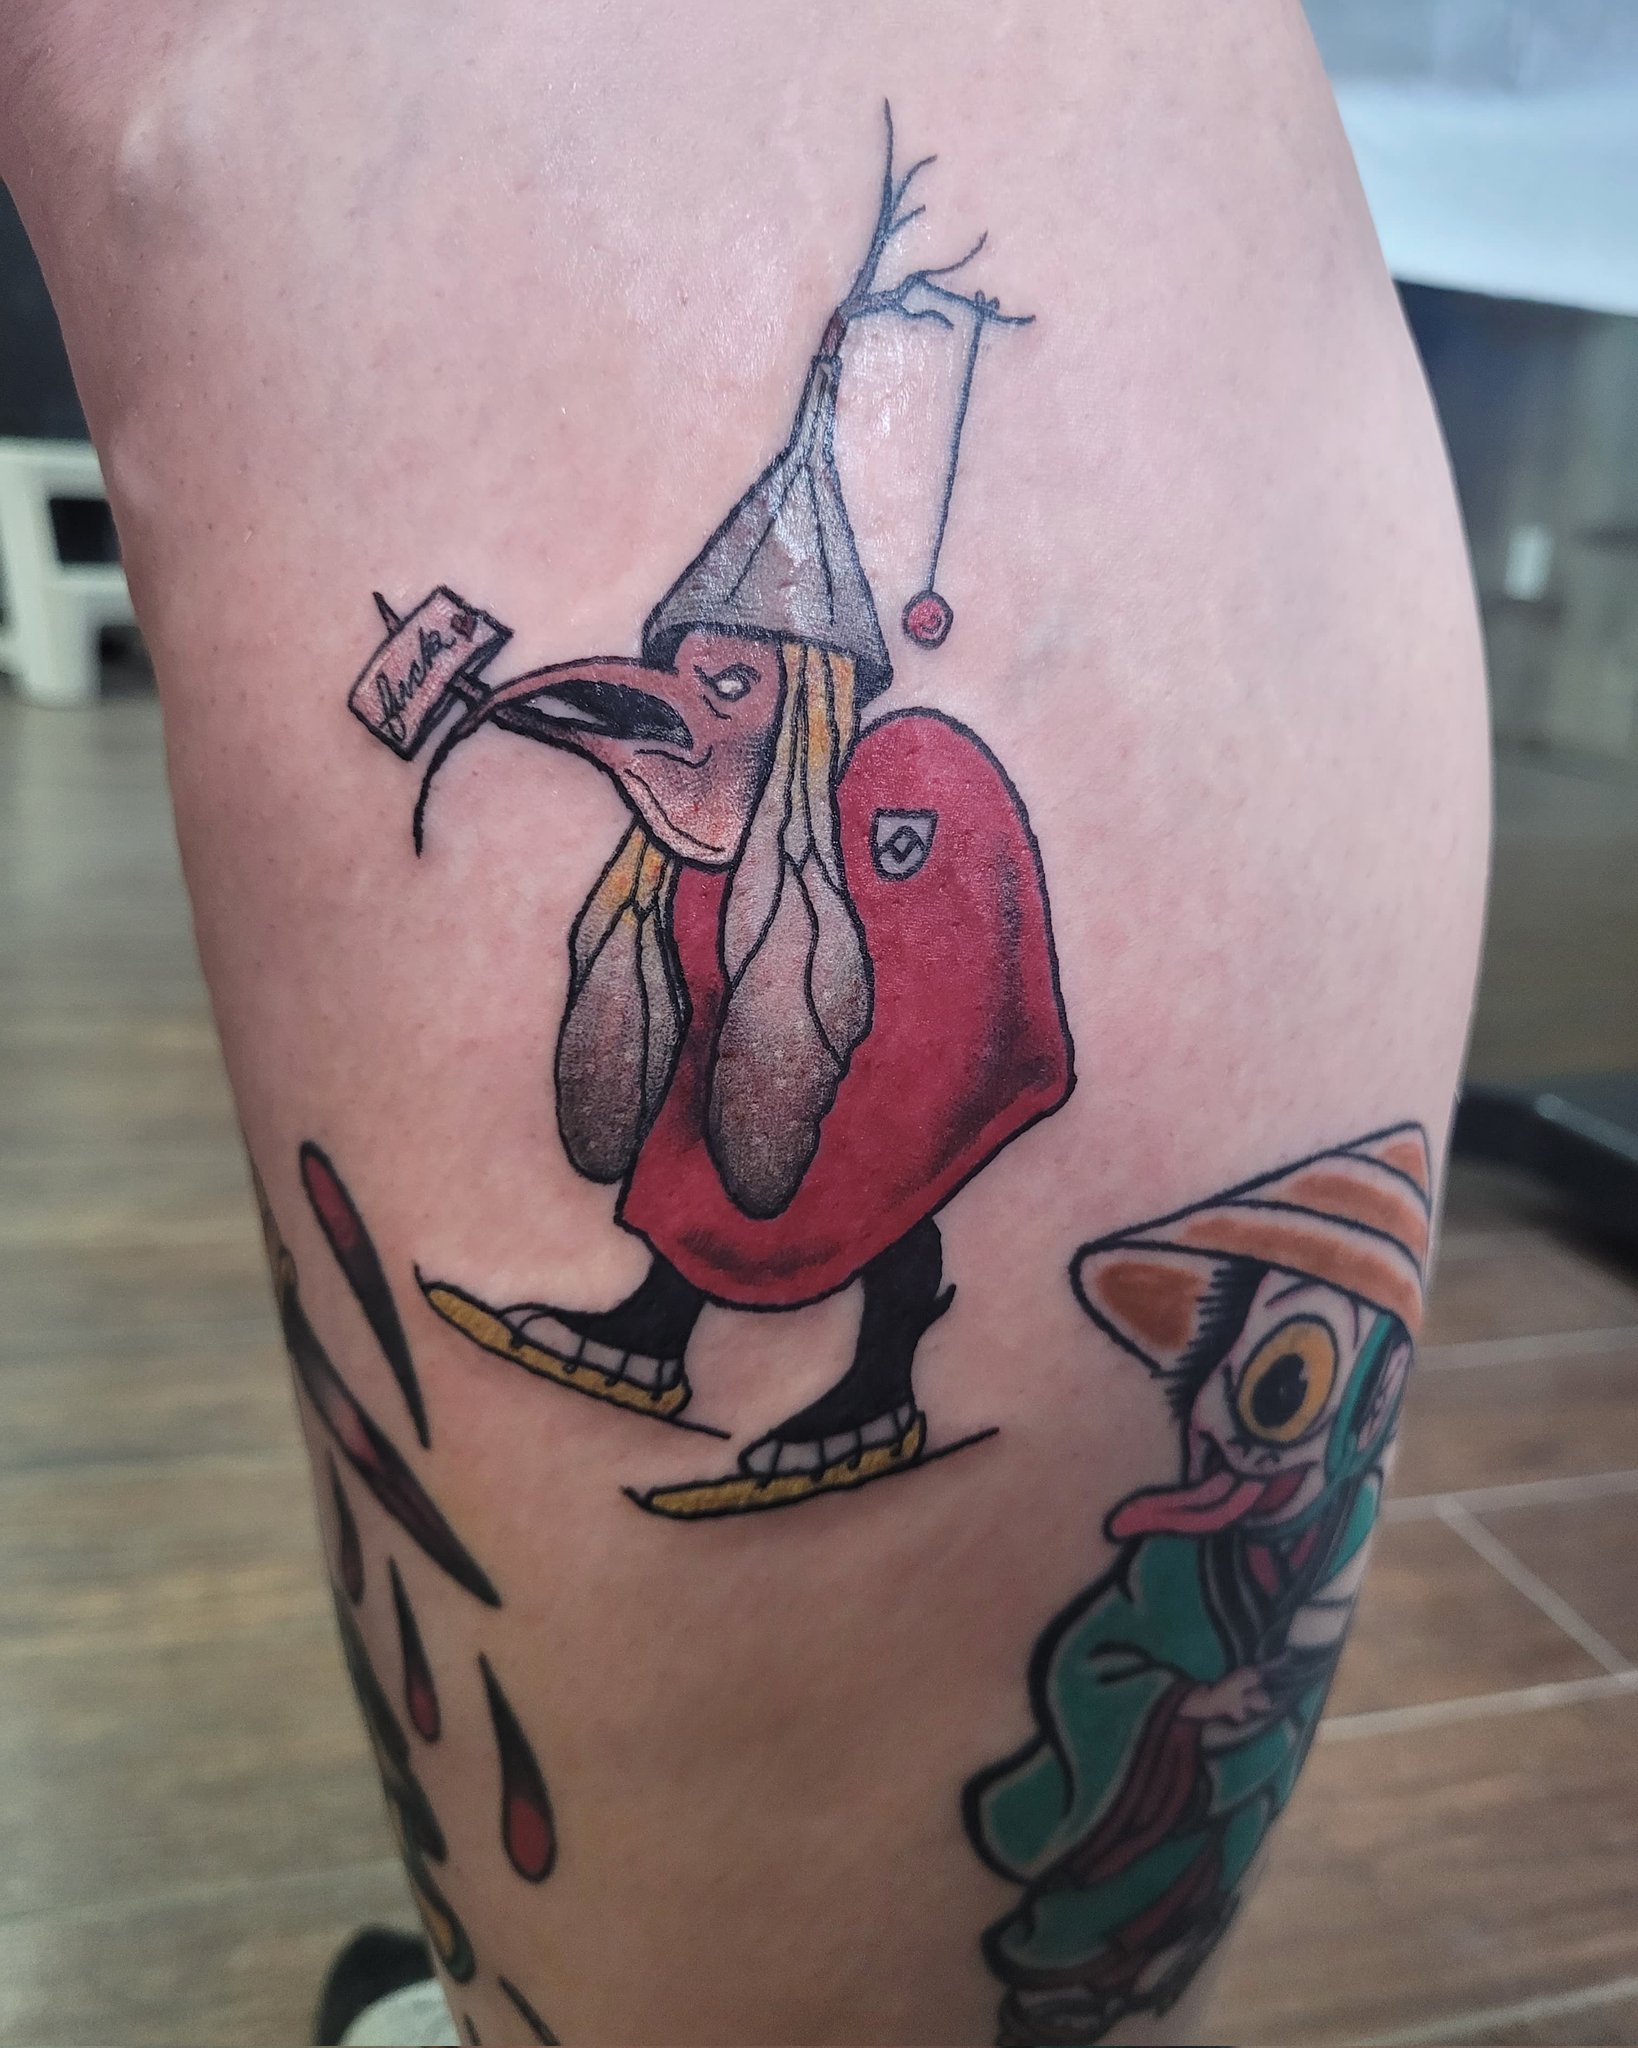 Hieronymus Bosch little demon by Sjap @ House of Tattoos Amsterdam - YouTube